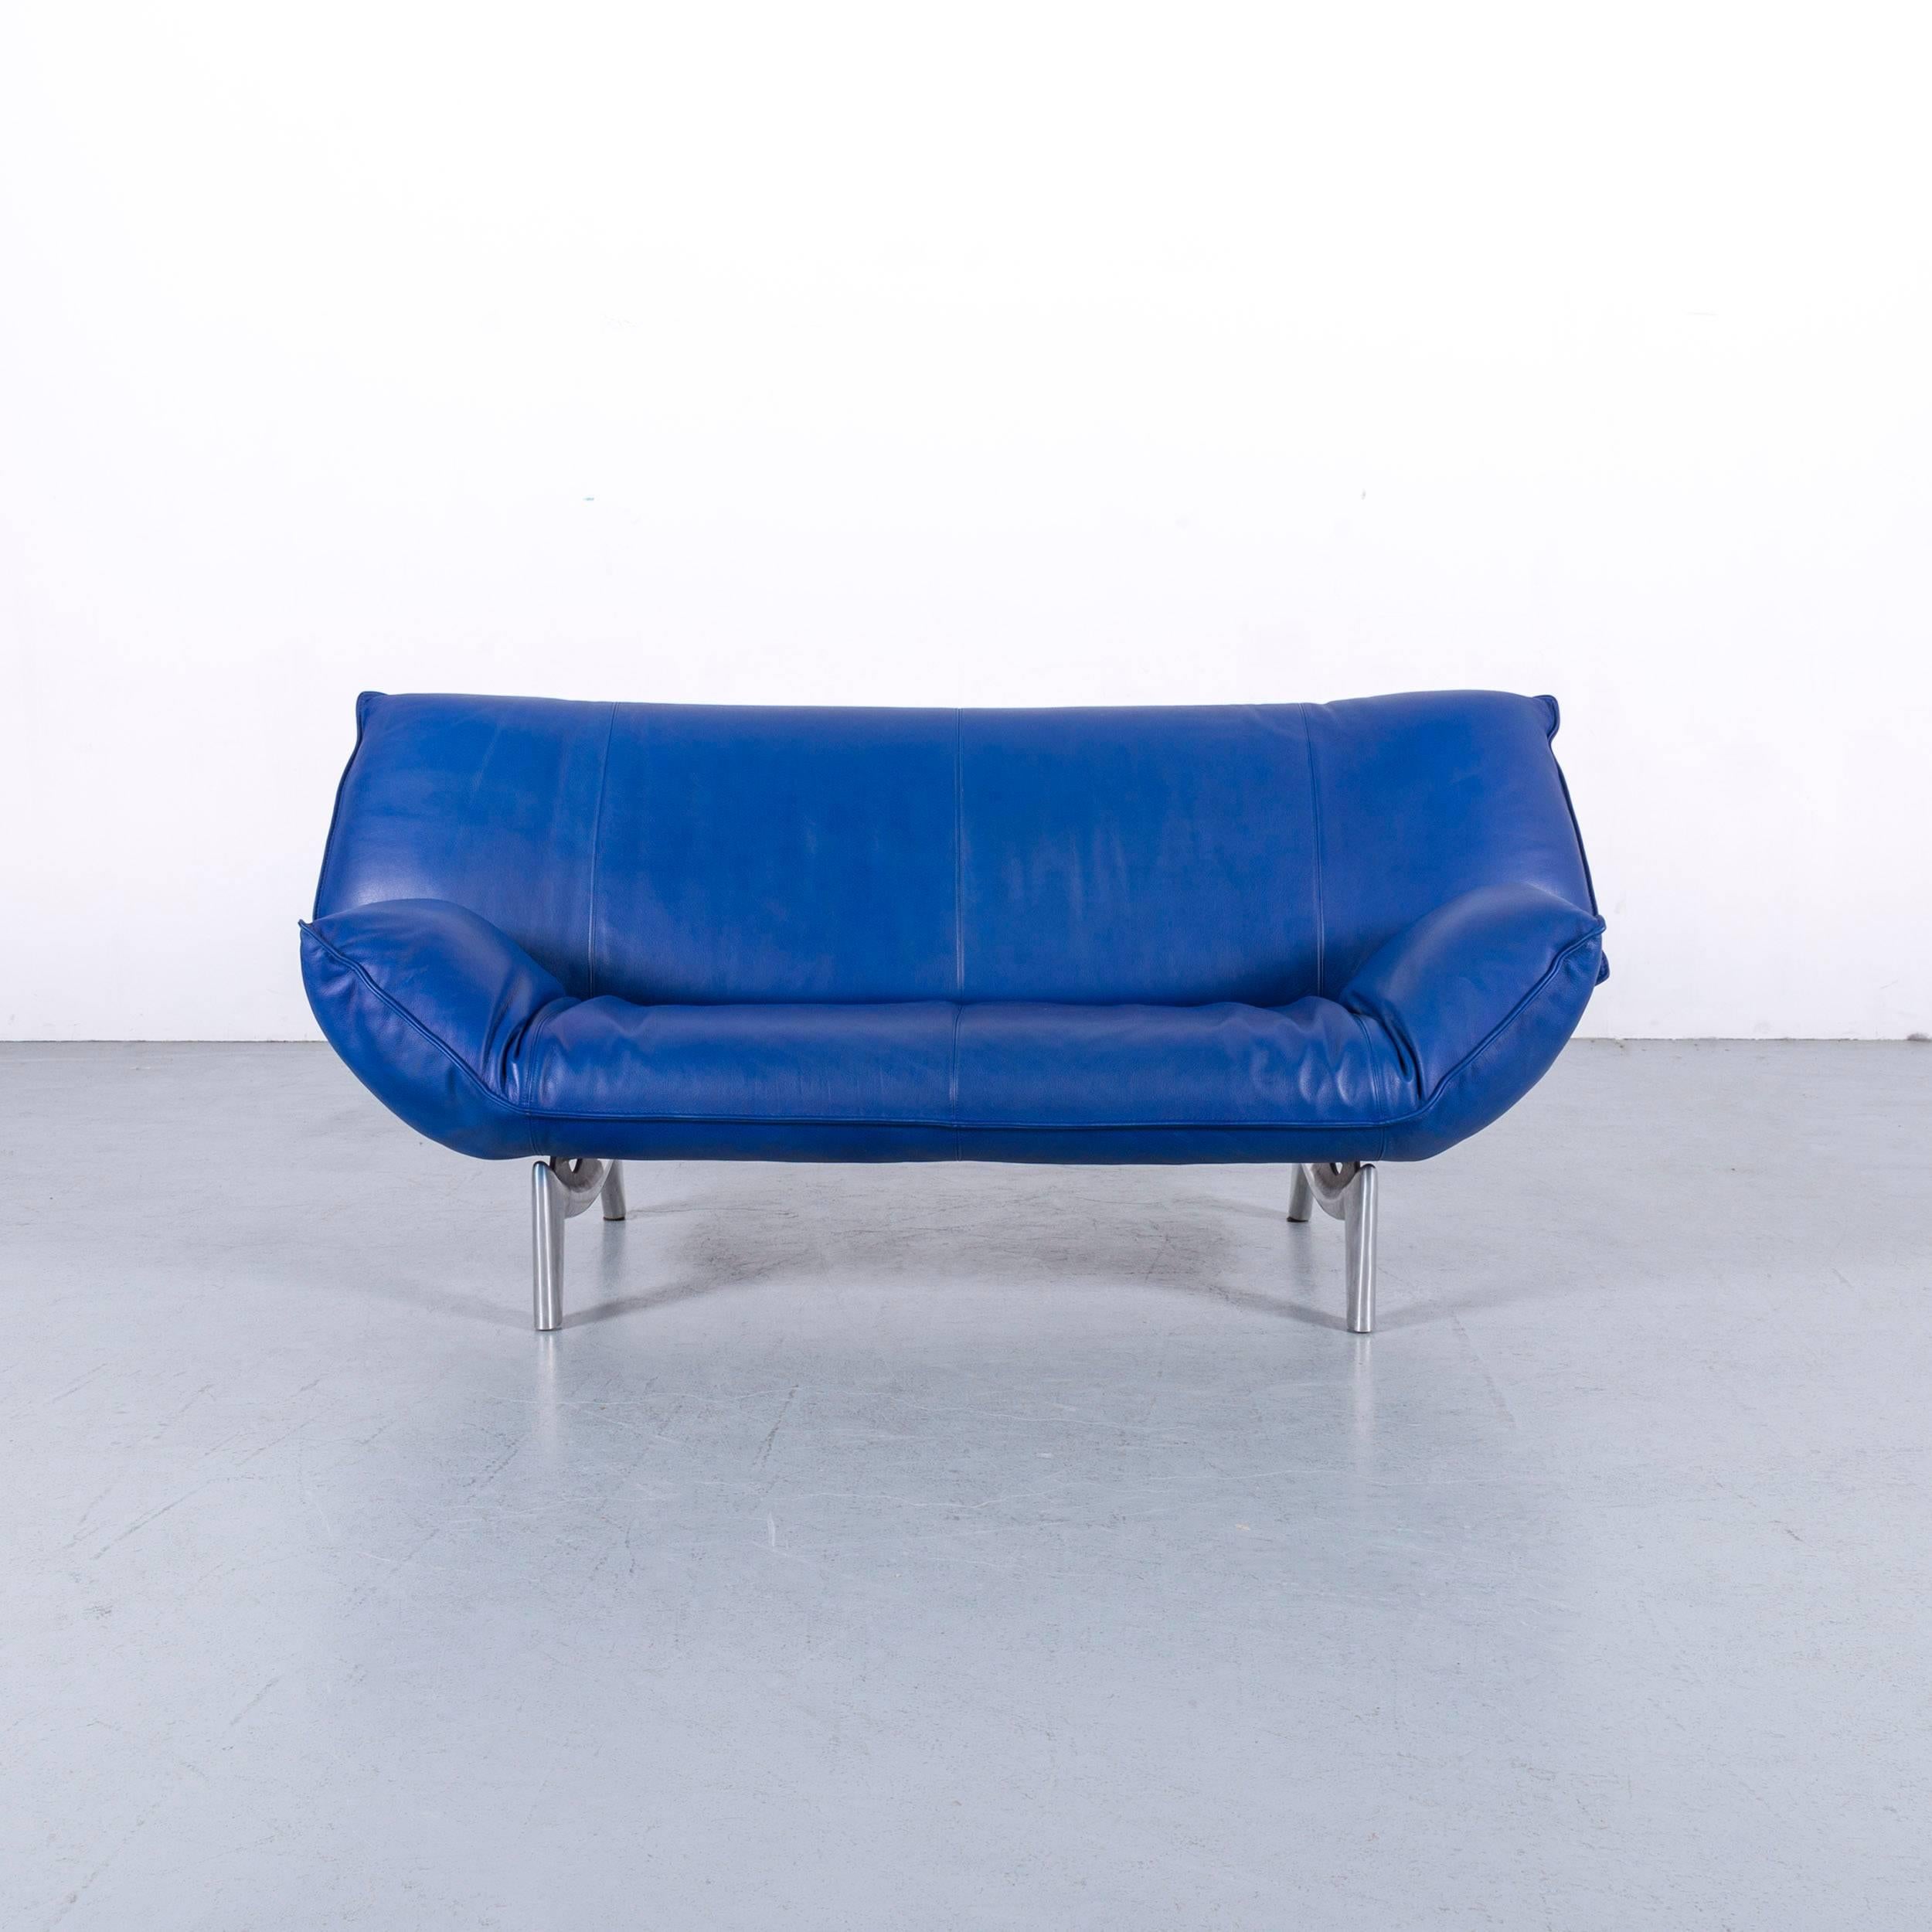 German Leolux Tango Designer Sofa Leather Blue Two-Seat Couch Modern For Sale